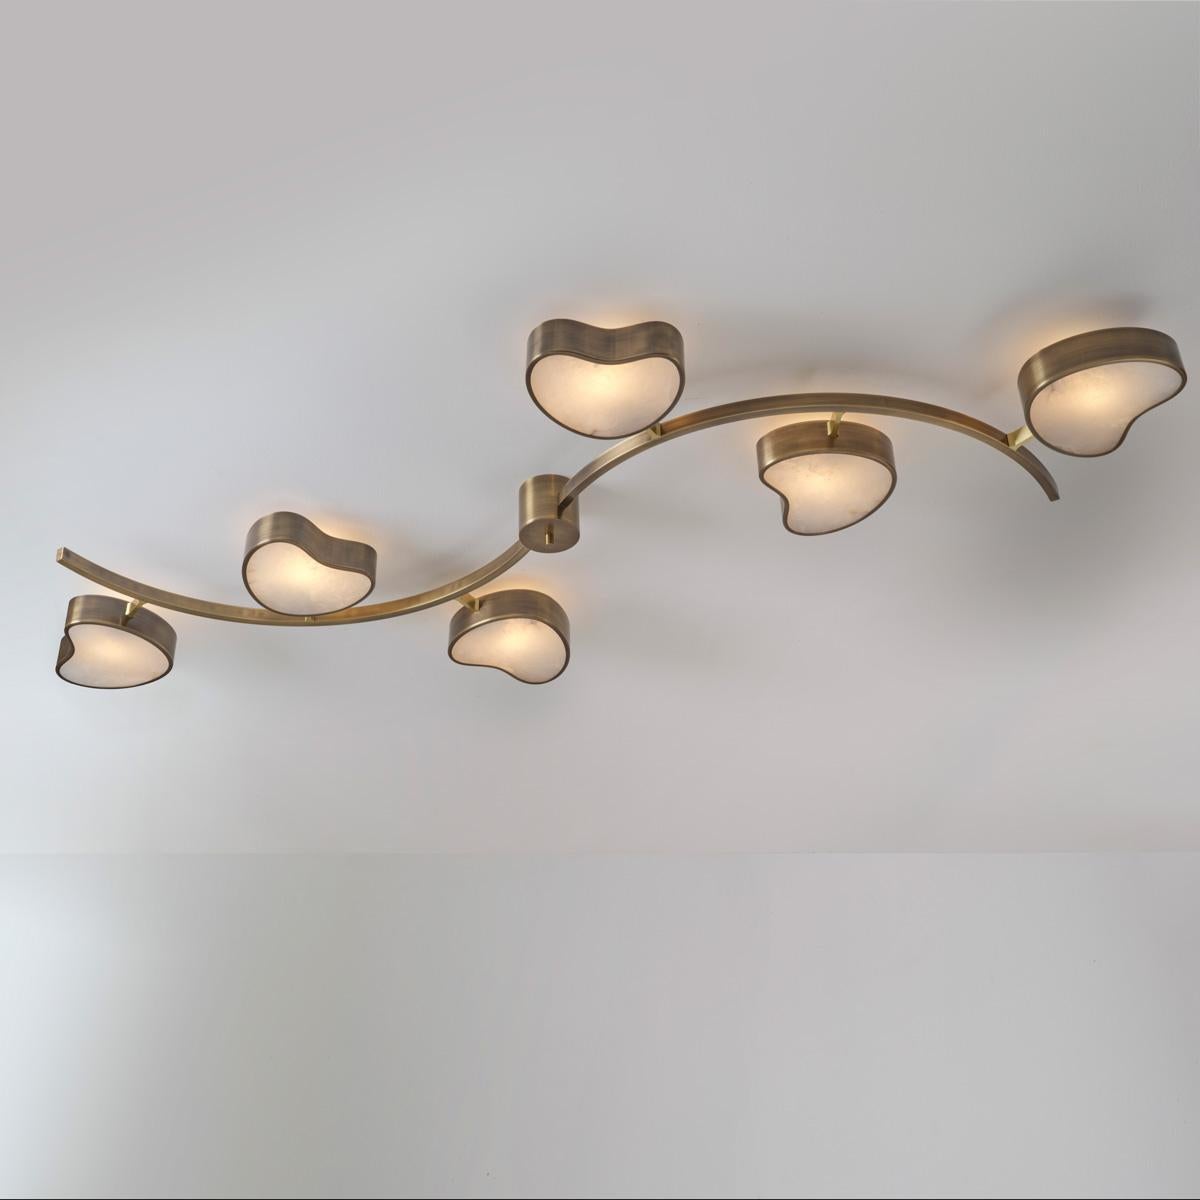 Cuore N.6 Ceiling Light by Gaspare Asaro. Bronze and Satin Brass Finish For Sale 4